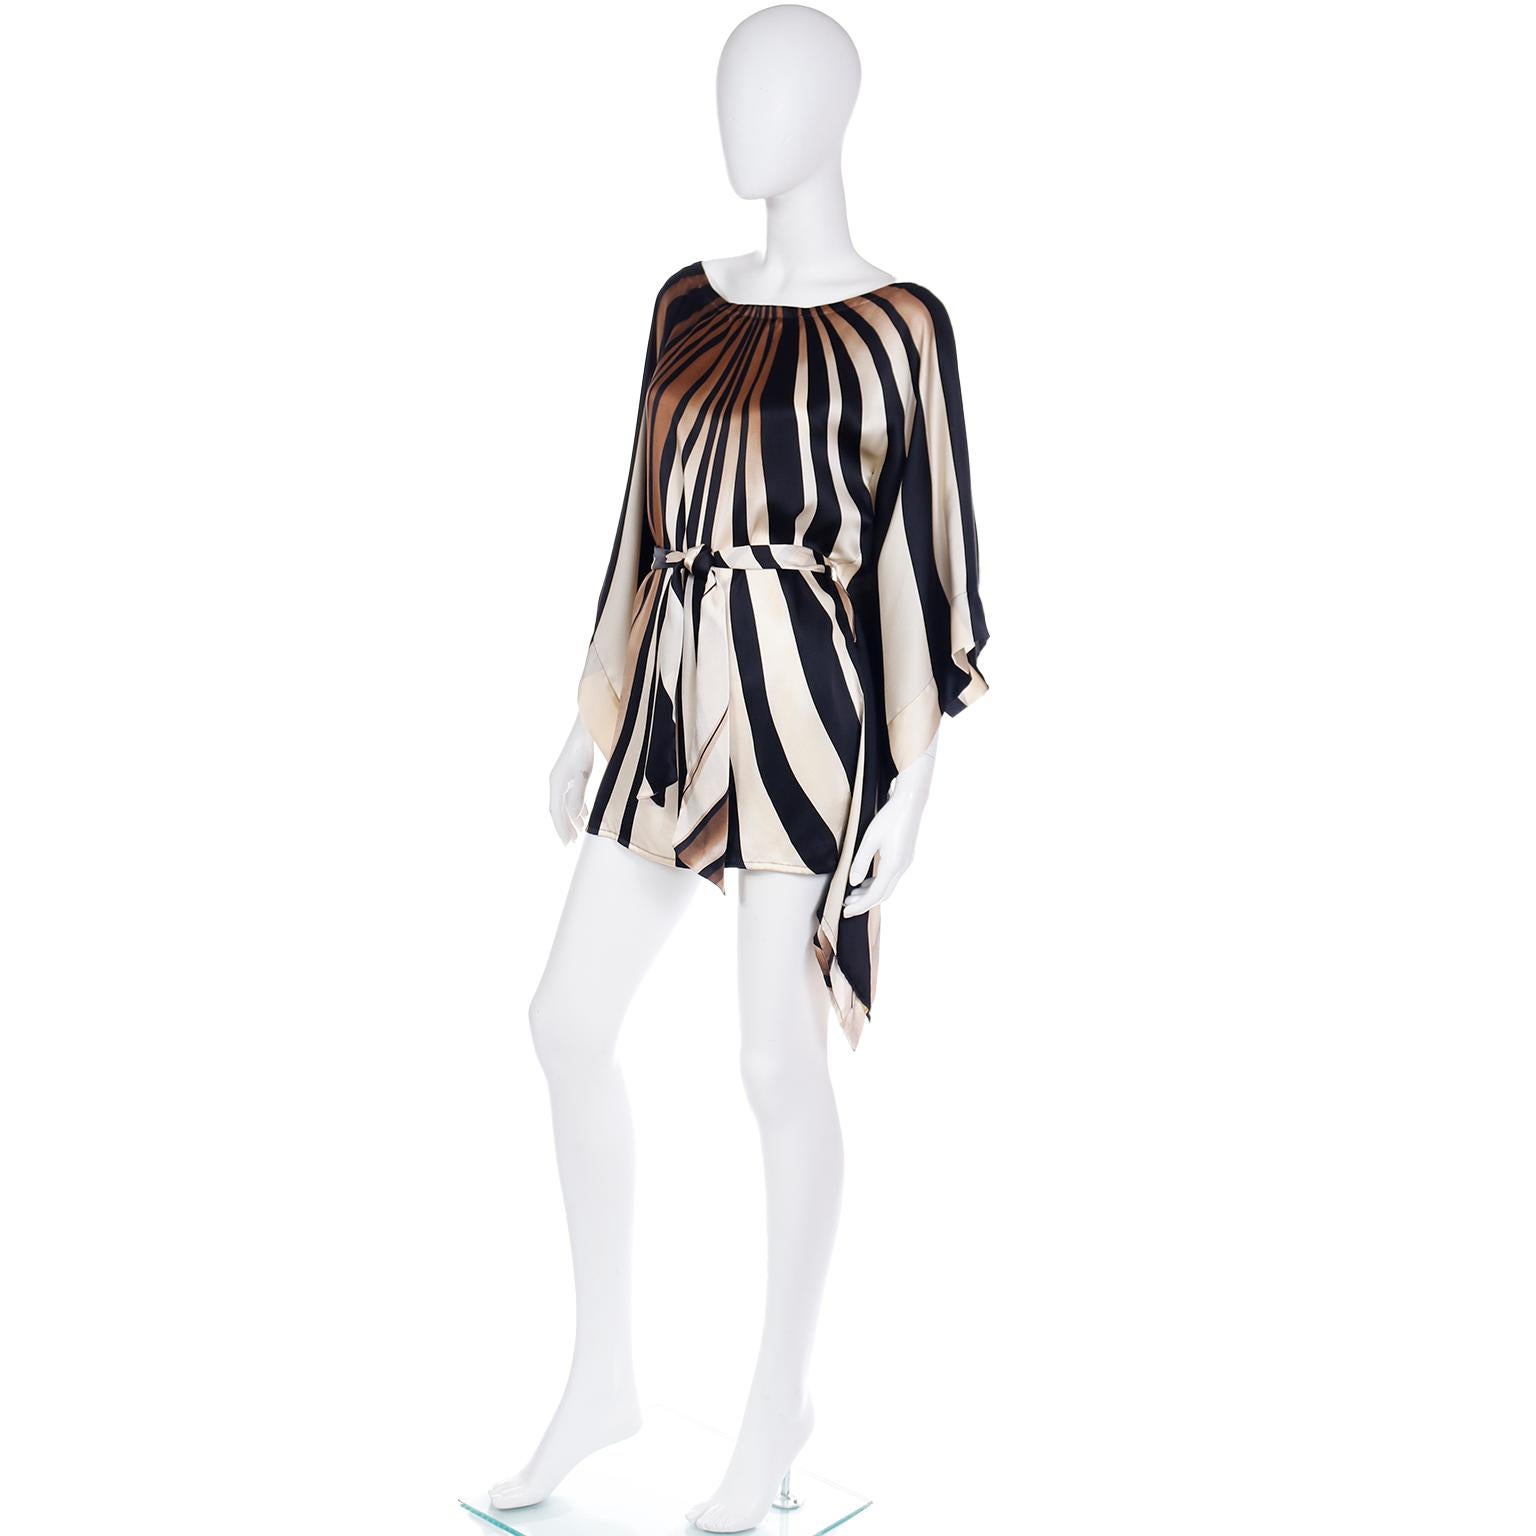 Vintage Silk Caftan Style Stripe Top in Black Brown & Ivory w Sash Belt In Excellent Condition For Sale In Portland, OR